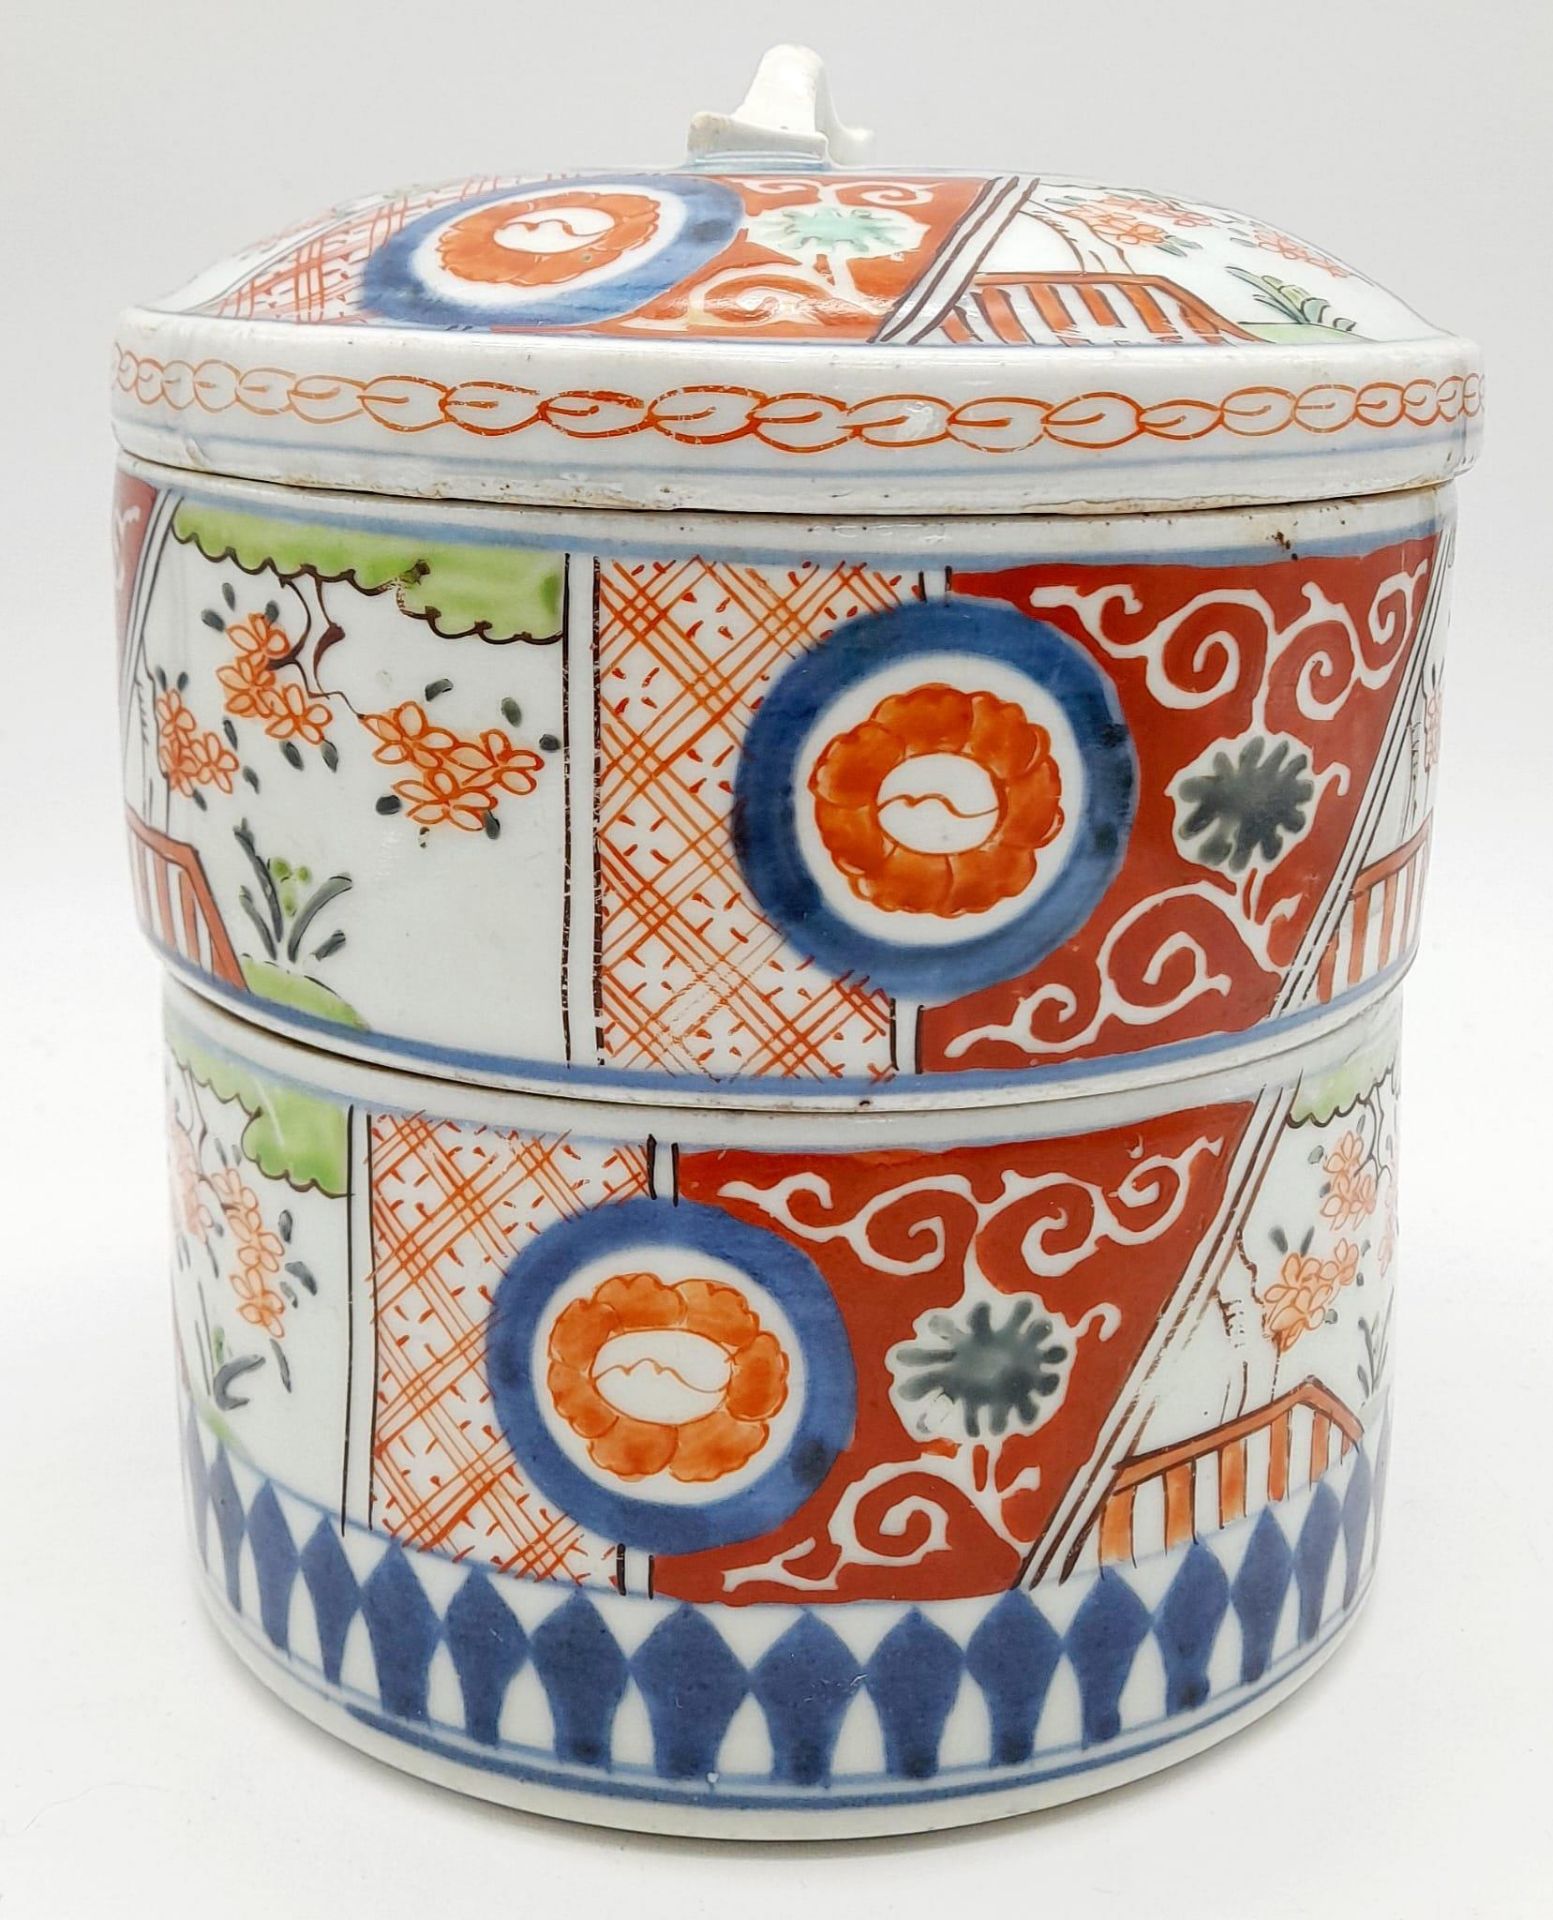 A Superb Antique (Mid 19th century) Japanese Double Tier Box with Lid. Wonderful colours in the